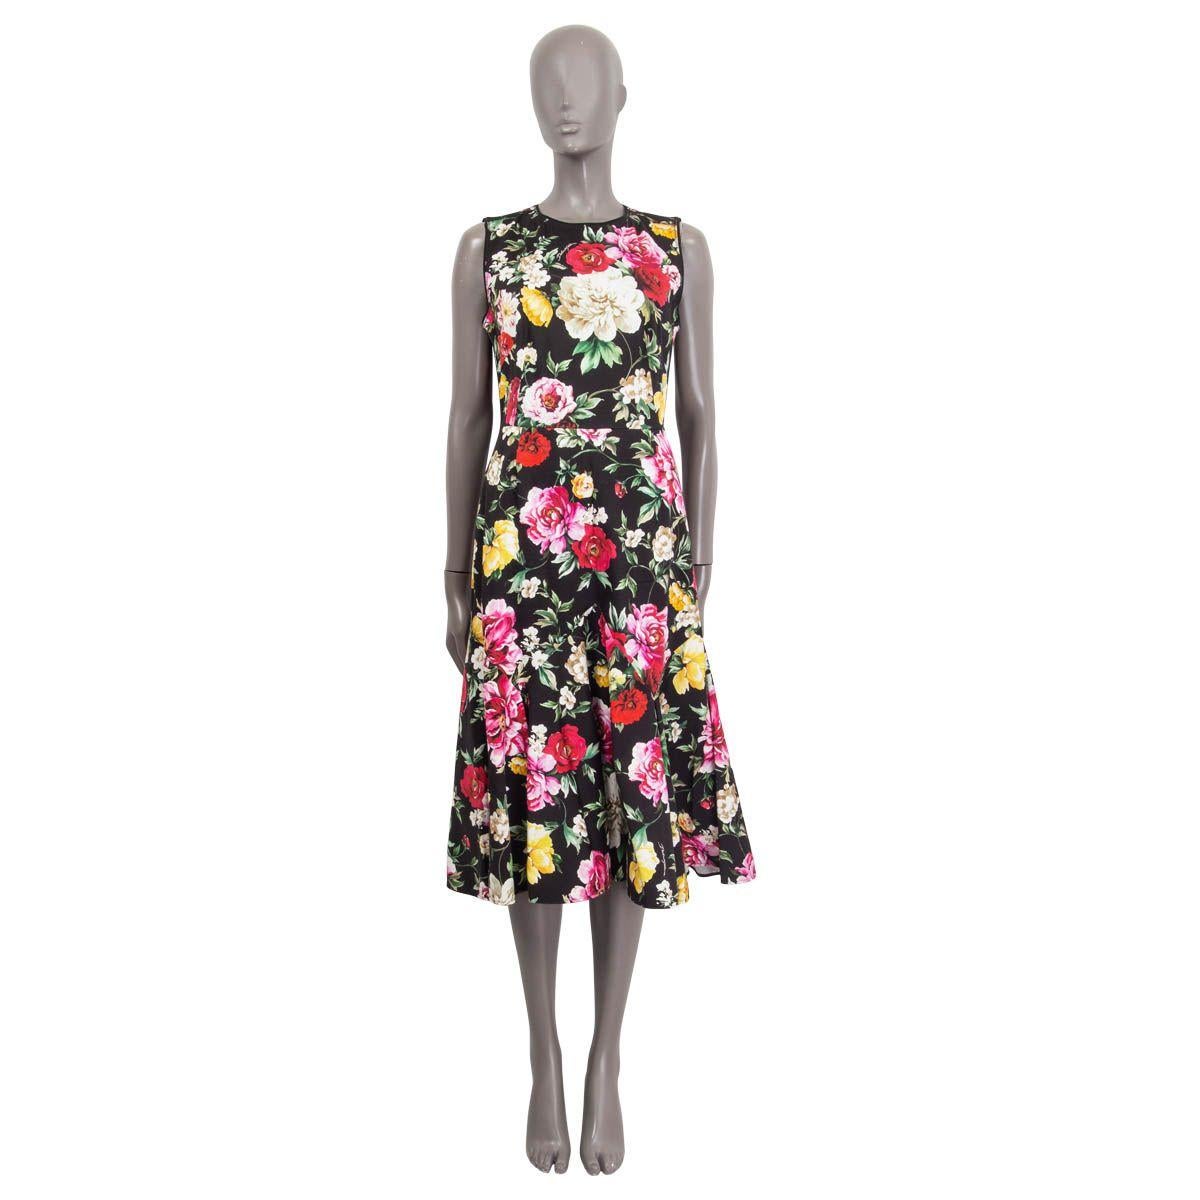 100% authentic Dolce & Gabbana sleeveless flared dress in black, yellow, white, red, pink and green cotton (97%) and elastane (3%). Features a floral print and opens with a concealed zipper and a hook on the back. Unlined. Has been worn and is in